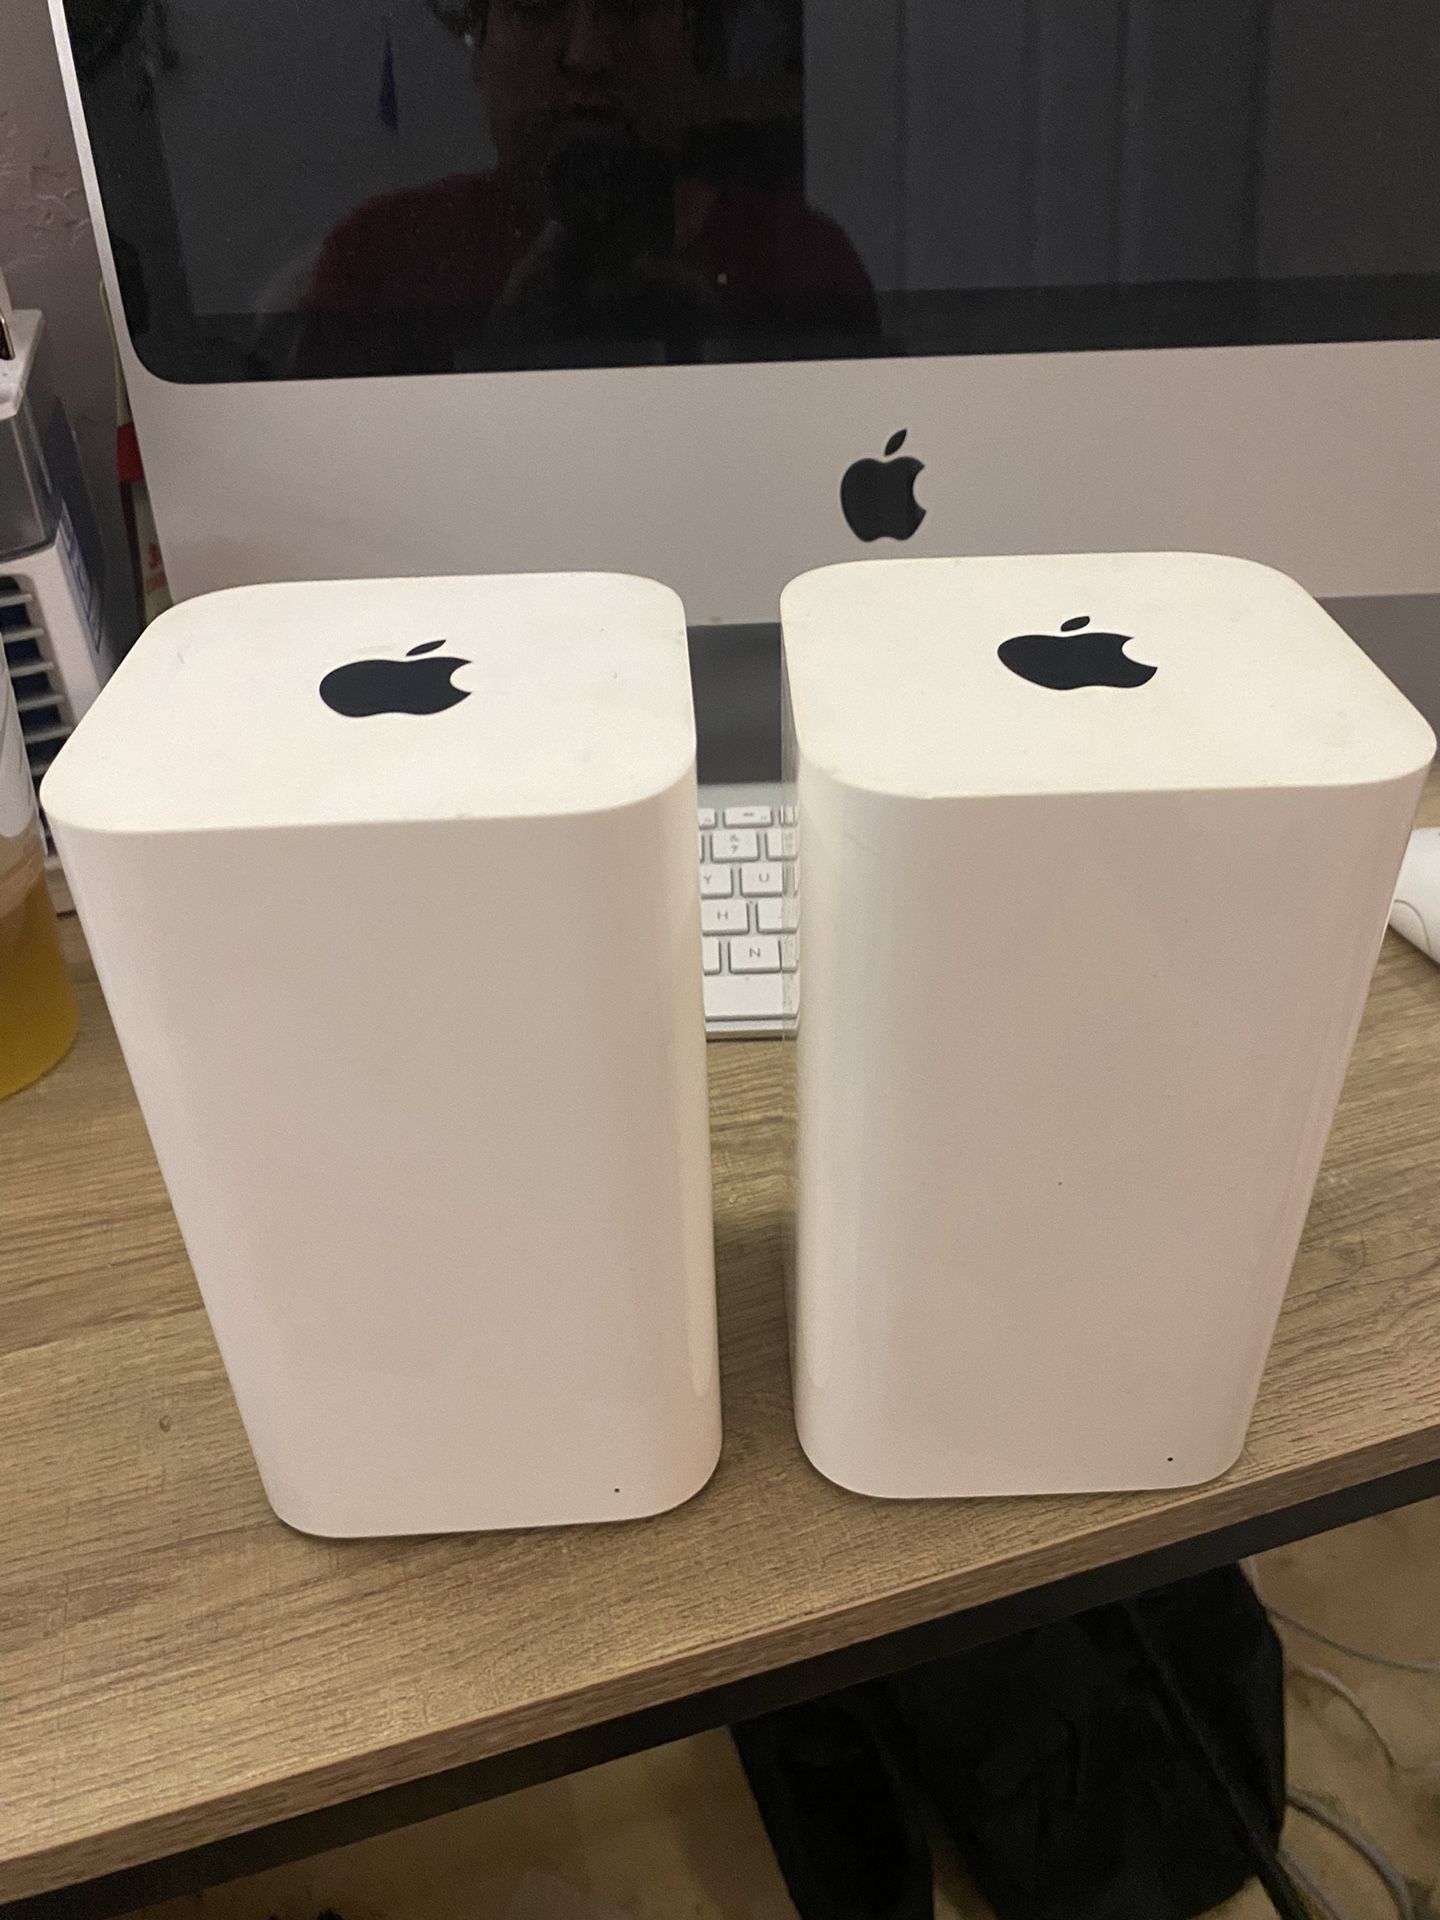 Apple airports (routers) 